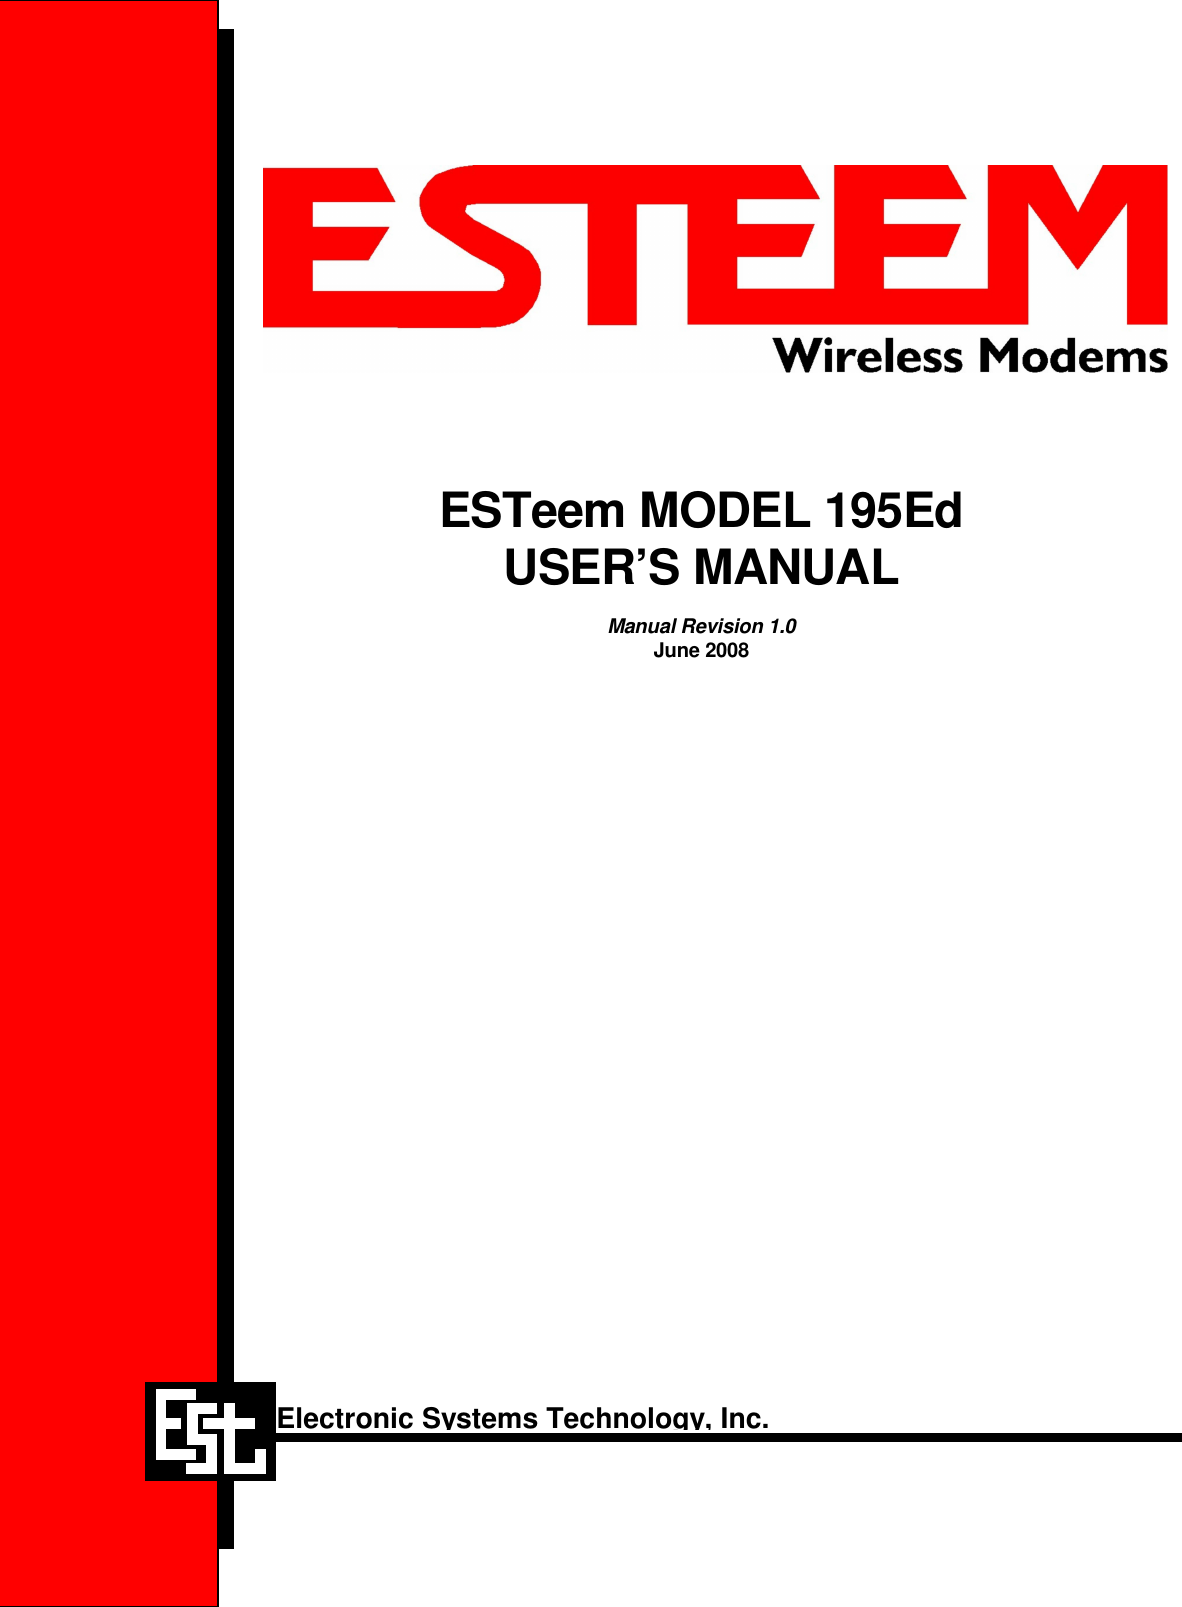                  ESTeem MODEL 195Ed USER’S MANUAL  Manual Revision 1.0 June 2008      Electronic Systems Technology, Inc. 